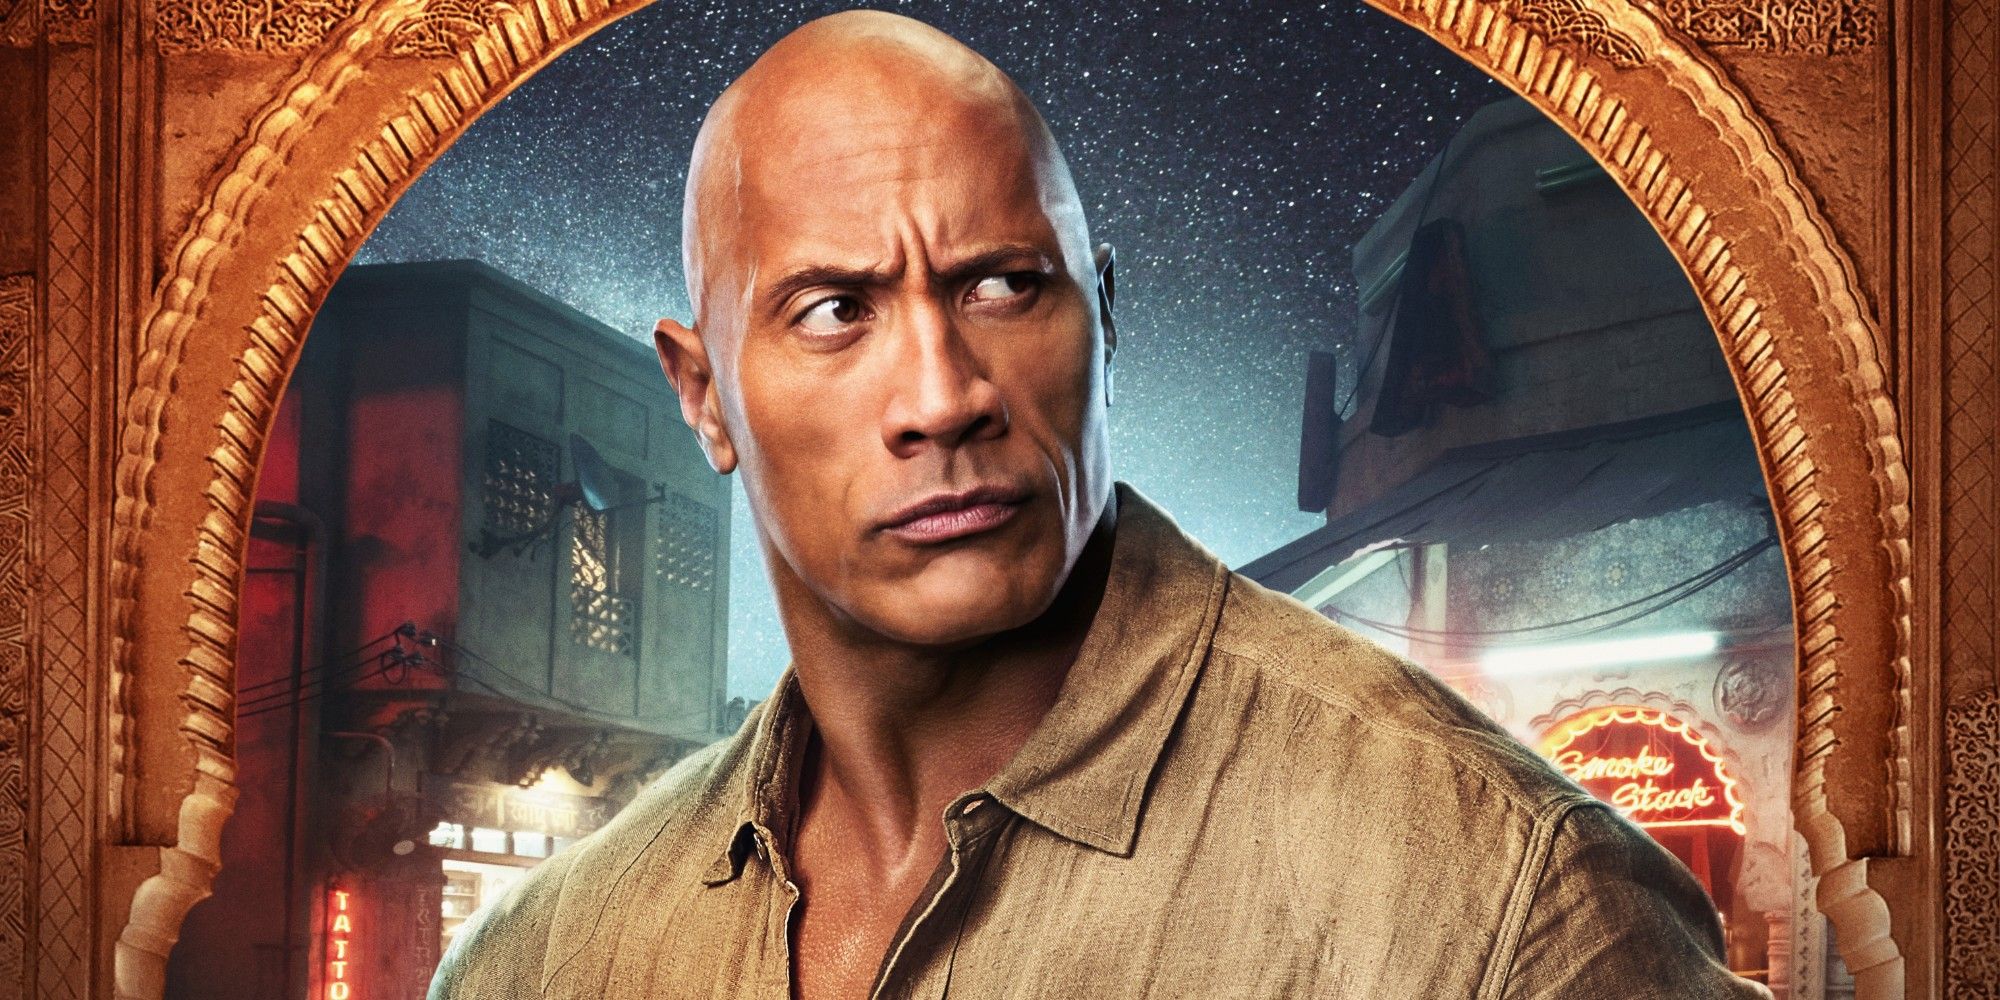 Jumanji: The Next Level Character Posters Have Arrived